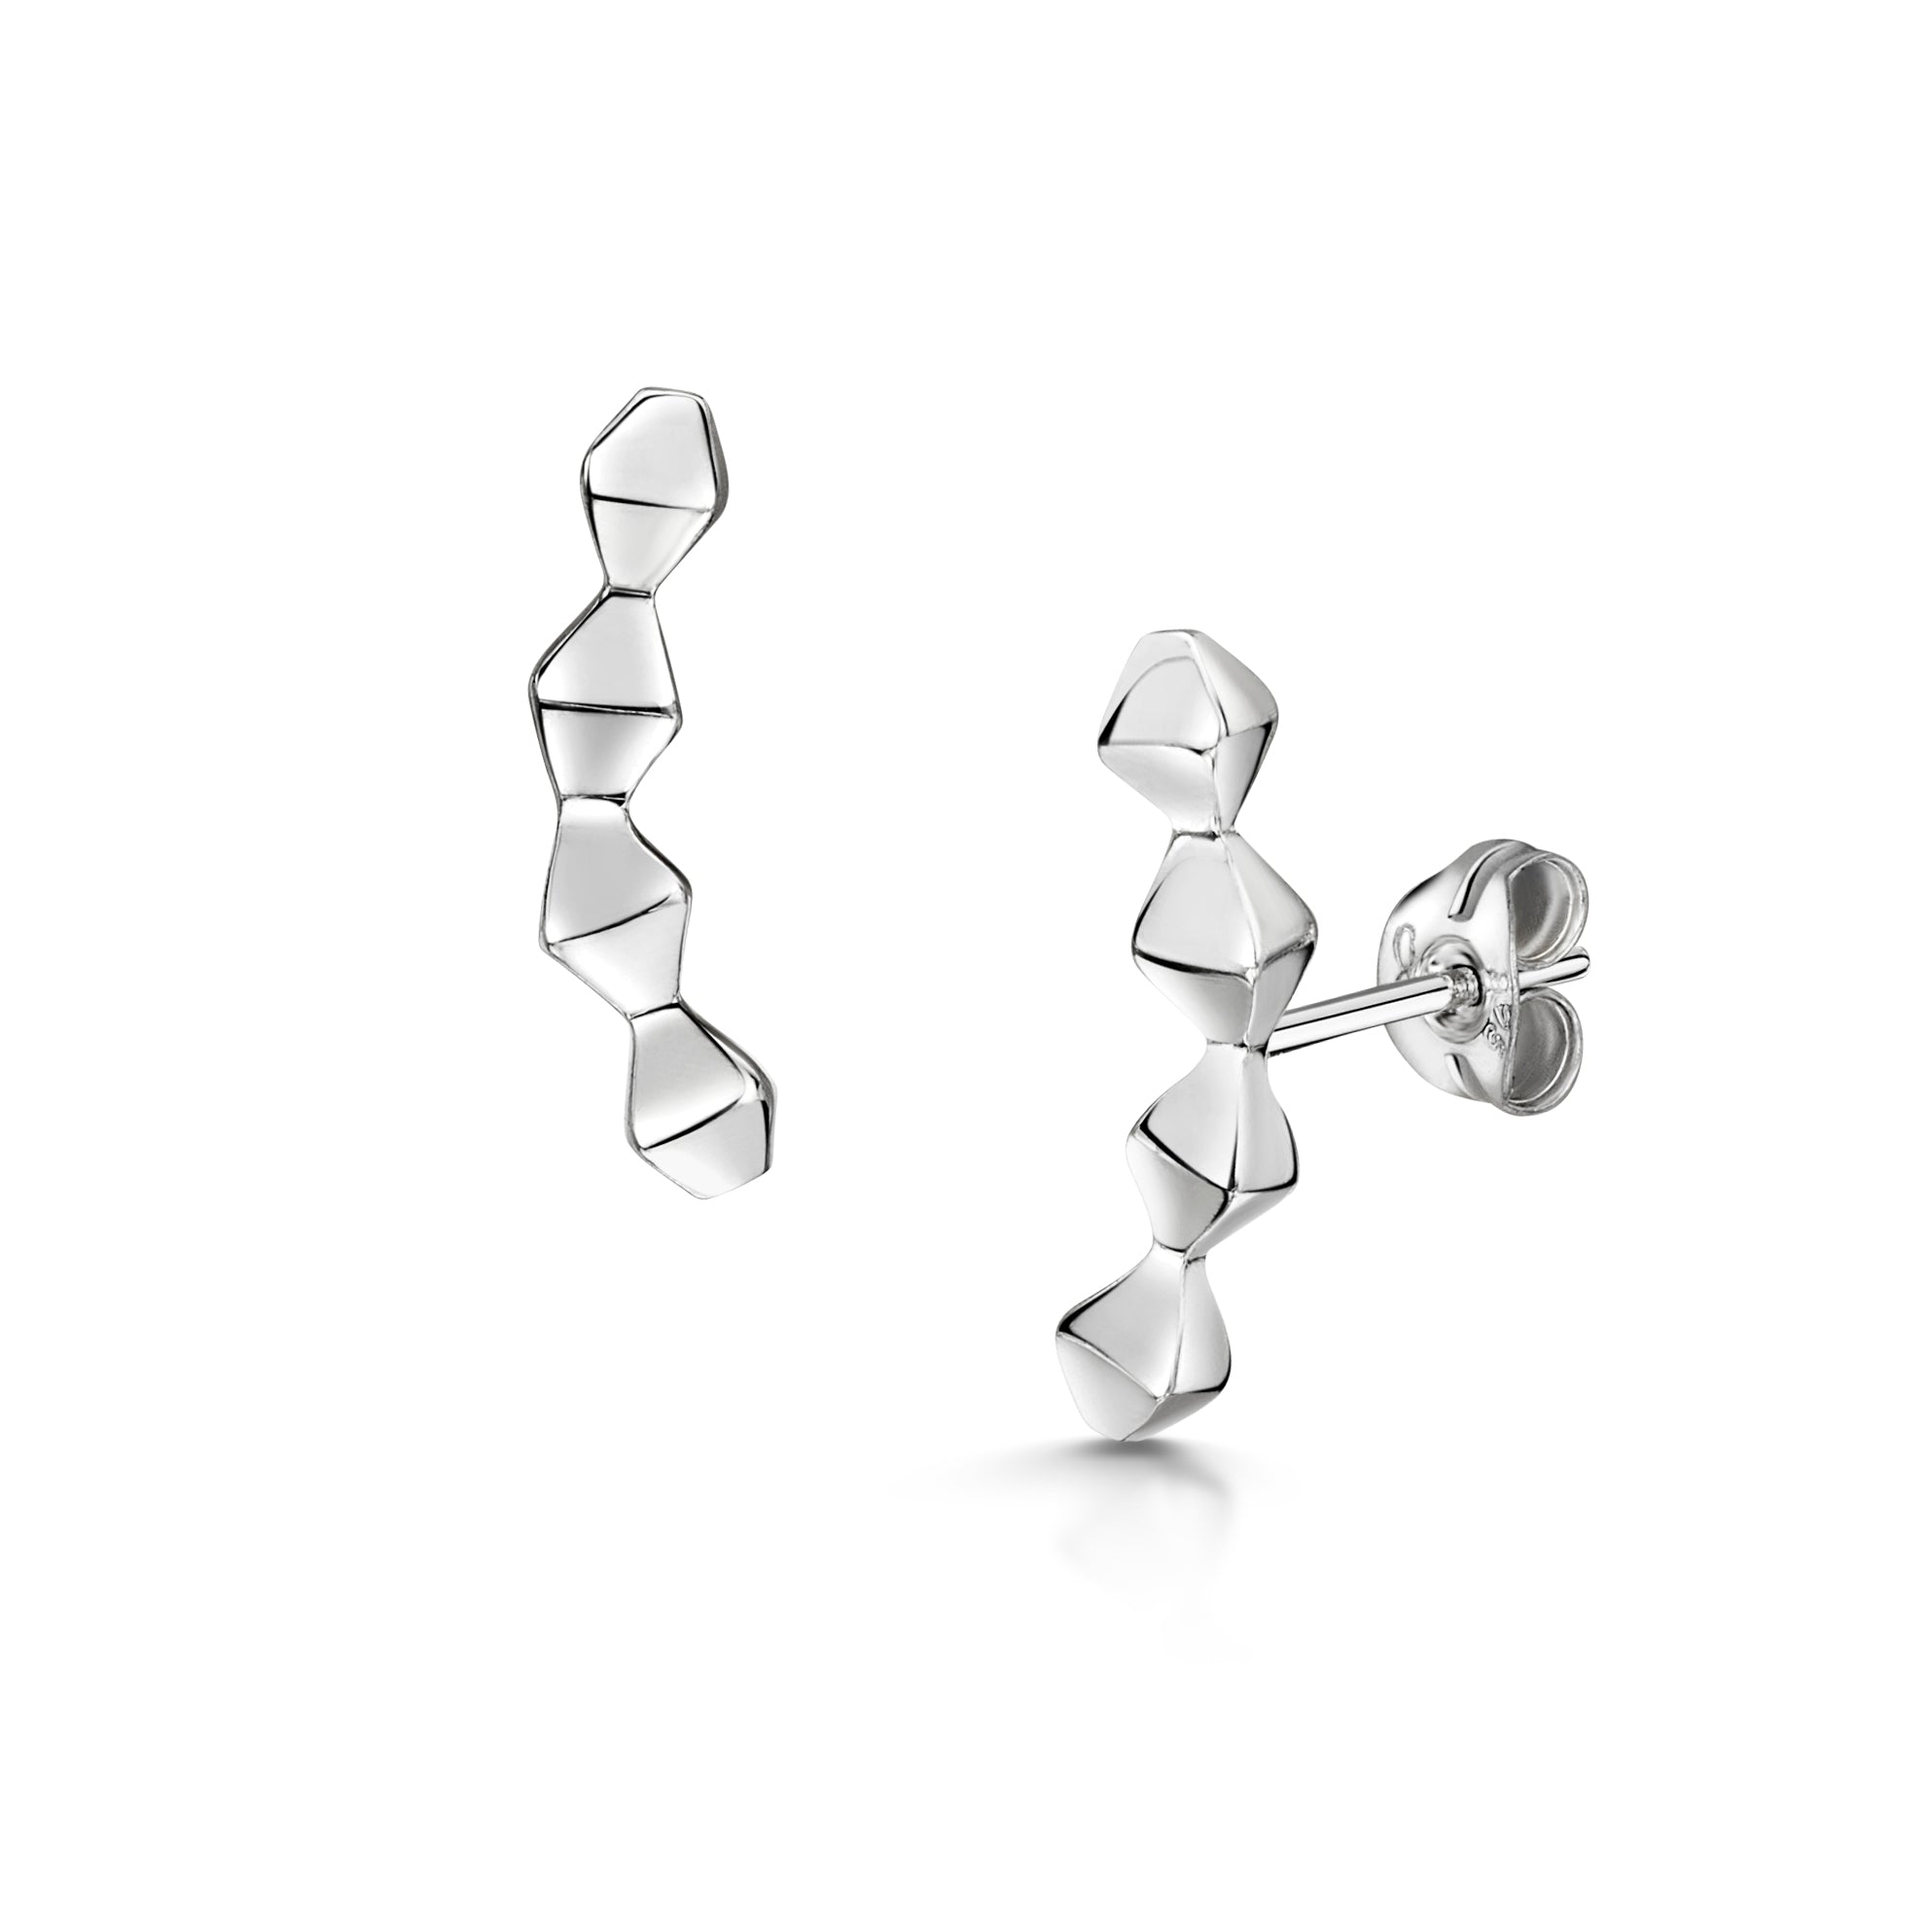 Pyra ear climbers in sterling silver - Romany Starrs